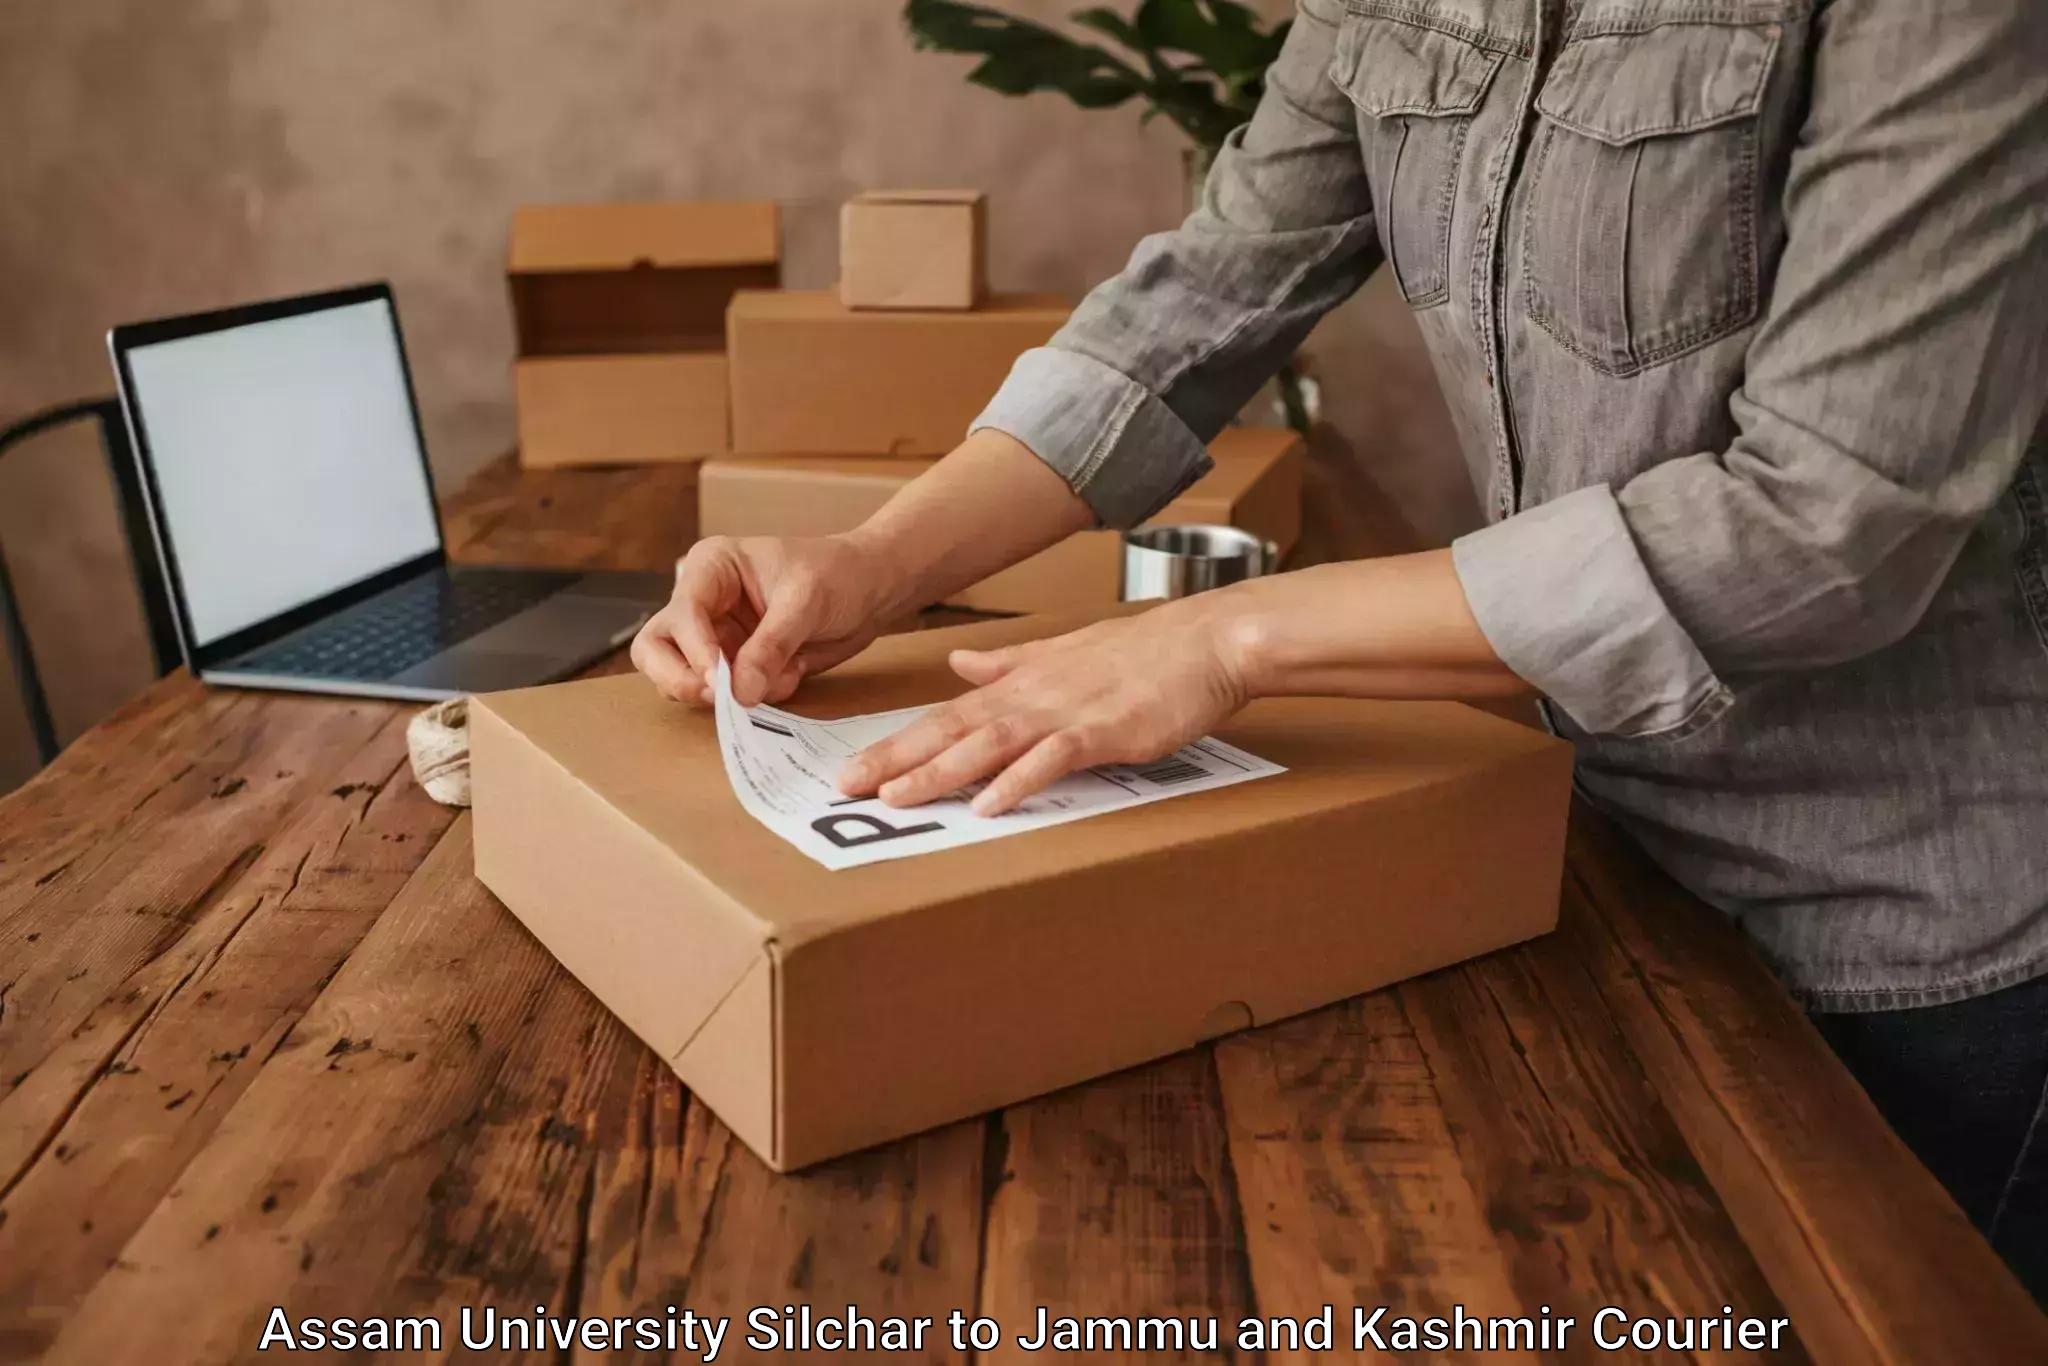 Express delivery solutions Assam University Silchar to Jammu and Kashmir